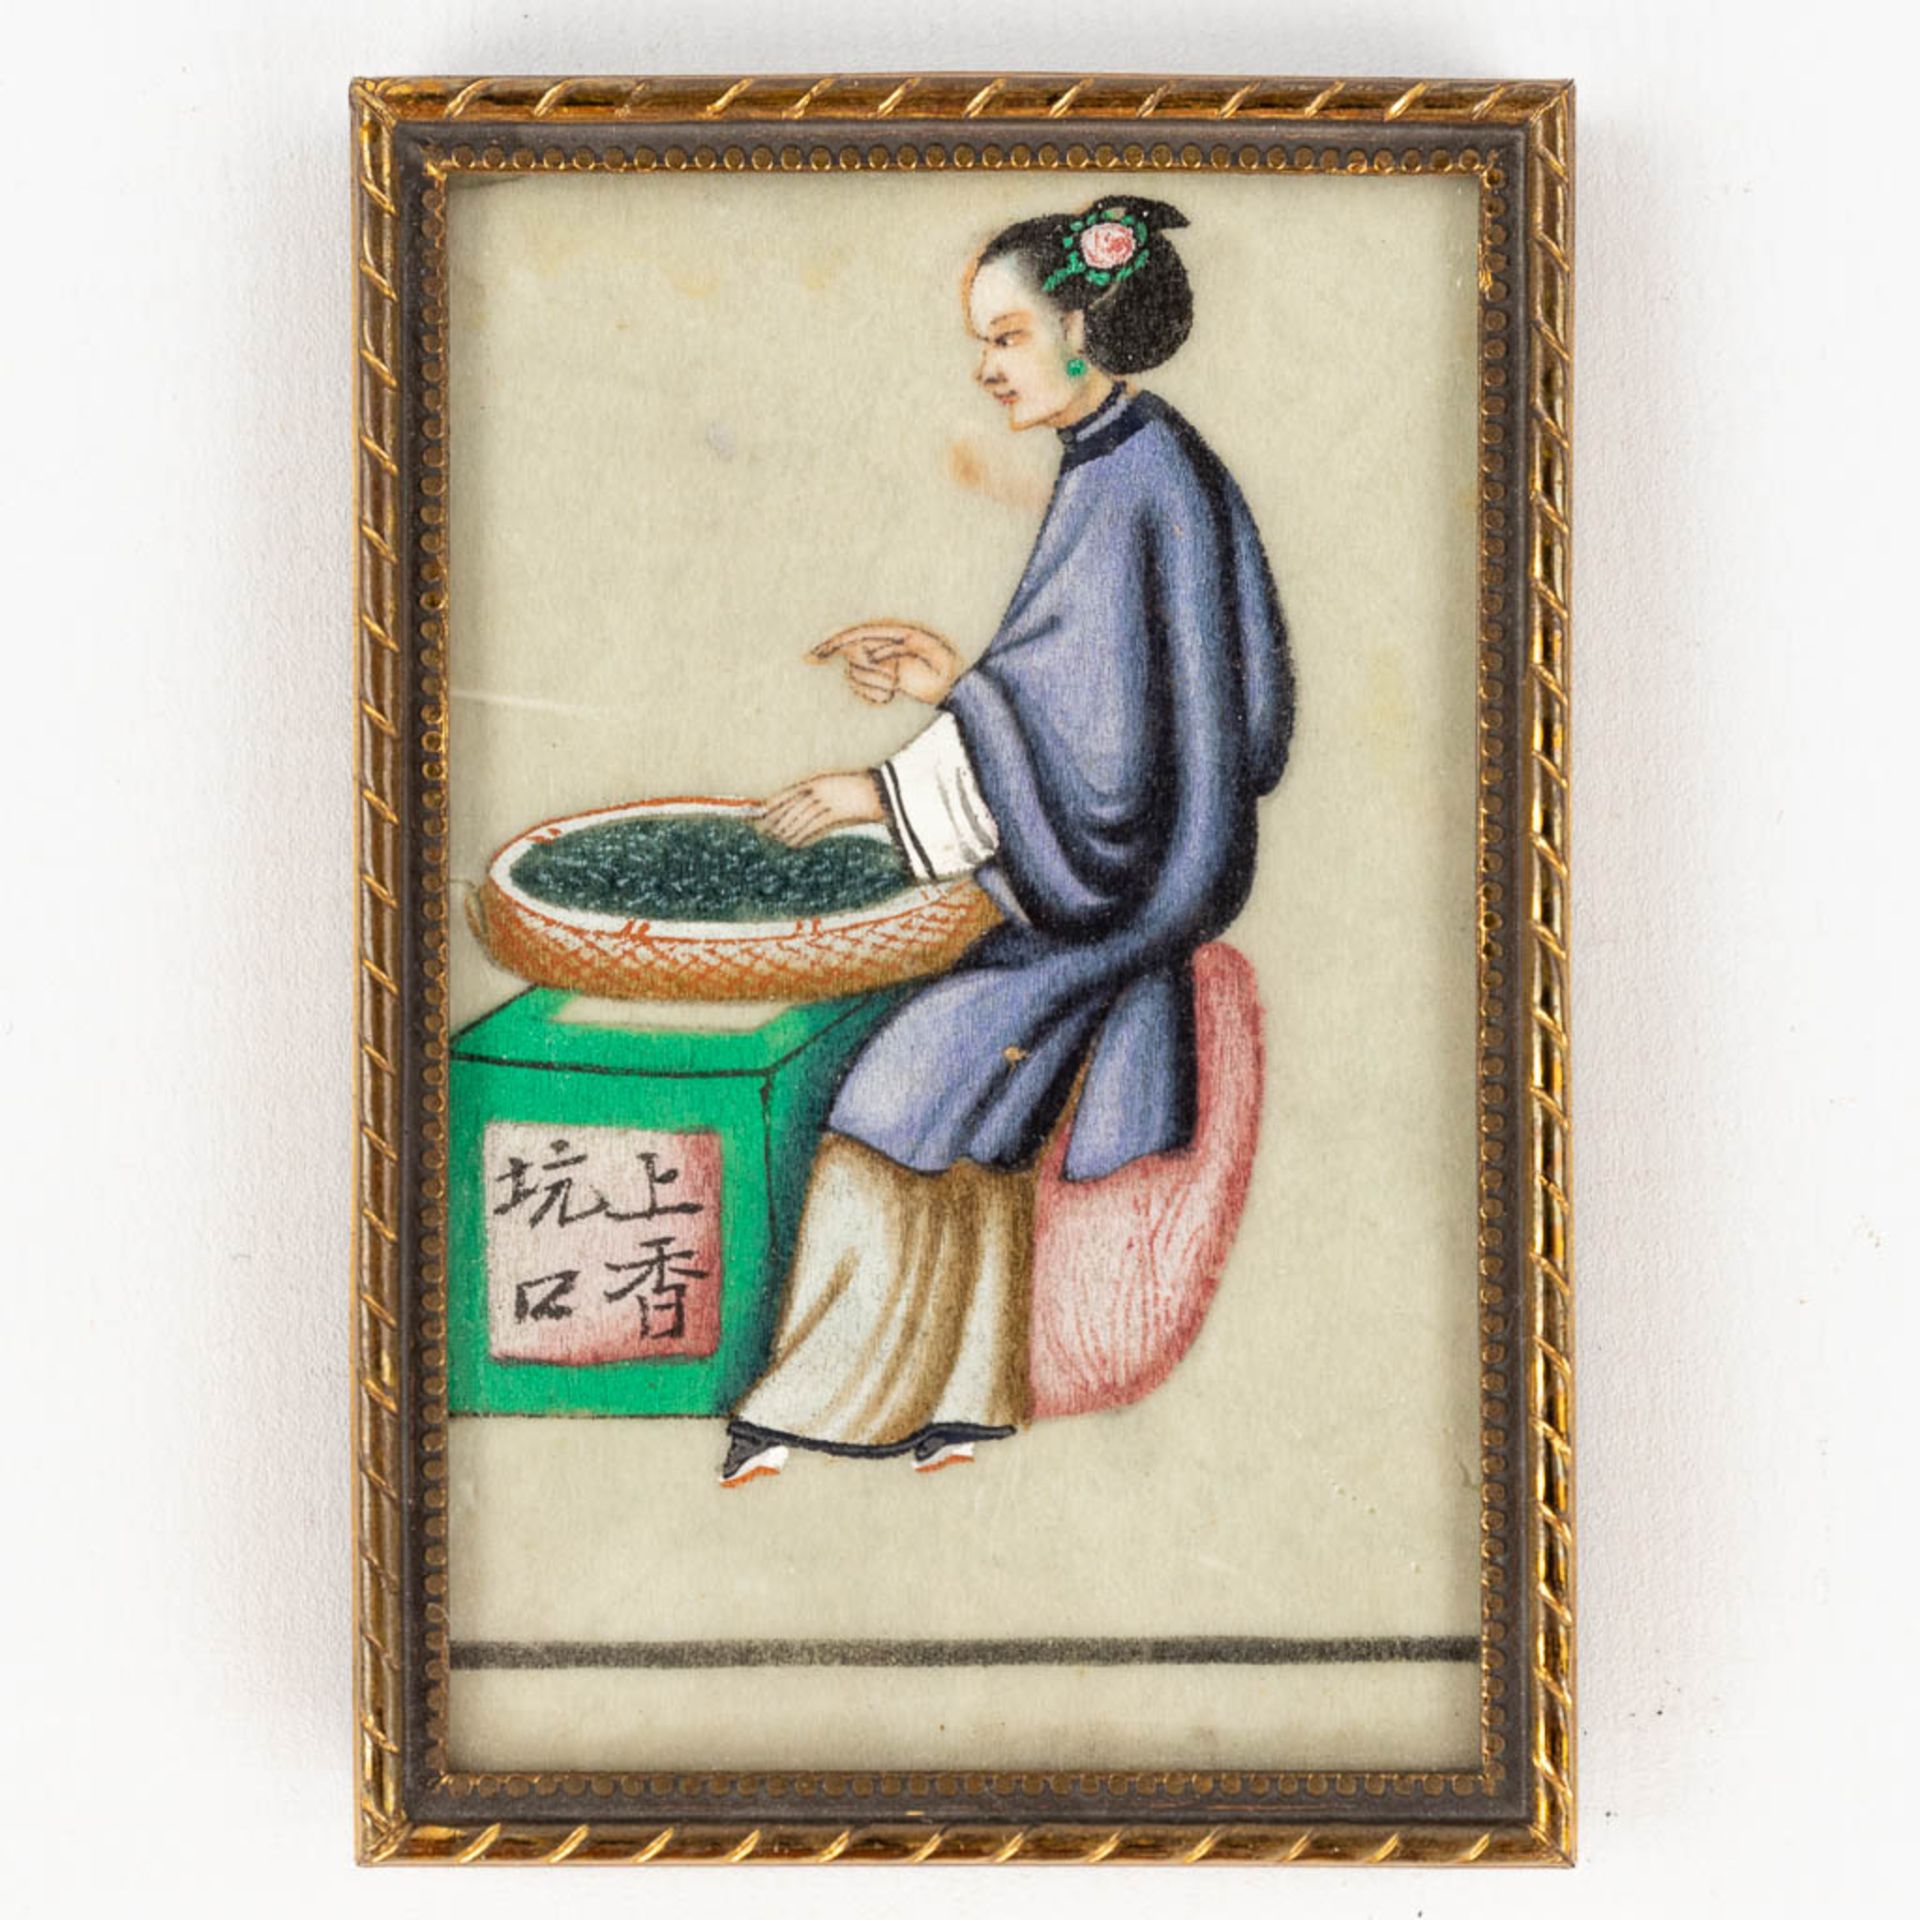 A collection of 8 Chinese watercolour drawings on paper. (W: 7 x H: 10 cm) - Image 10 of 12